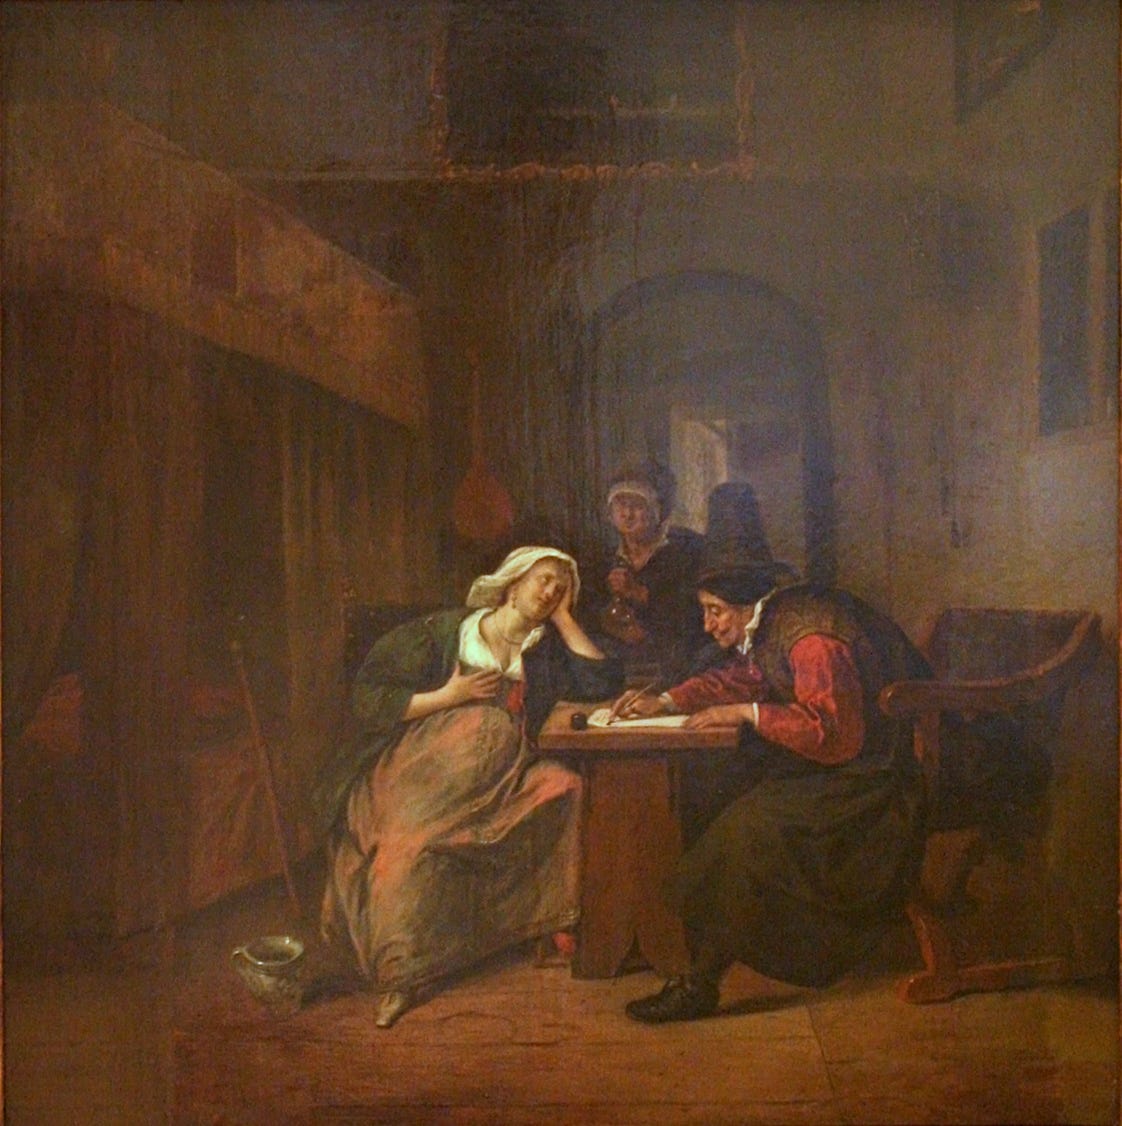 File:Jan Steen - Physician and a Woman Patient.JPG - Wikimedia Commons